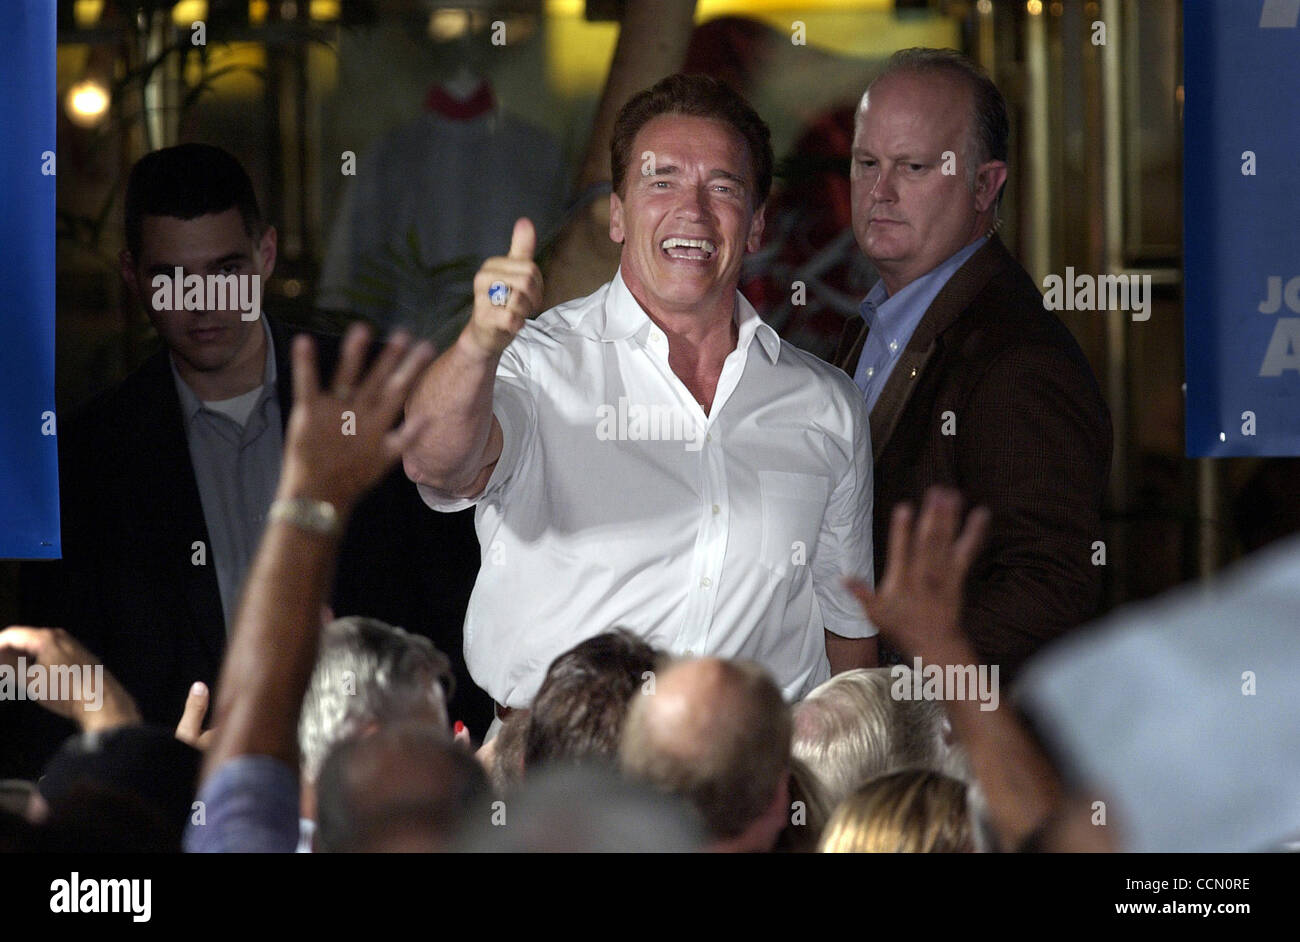 California Governor Arnold Schwarzenegger gives a thumbs up to supporters as he prepares to leave a 'citizens rally' at Sherwood Mall in Stockton, CA on Sunday, July 18, 2004. The governor urged those in attendance to contact their legislators and tell them to support the governor's budget.  (Sacram Stock Photo